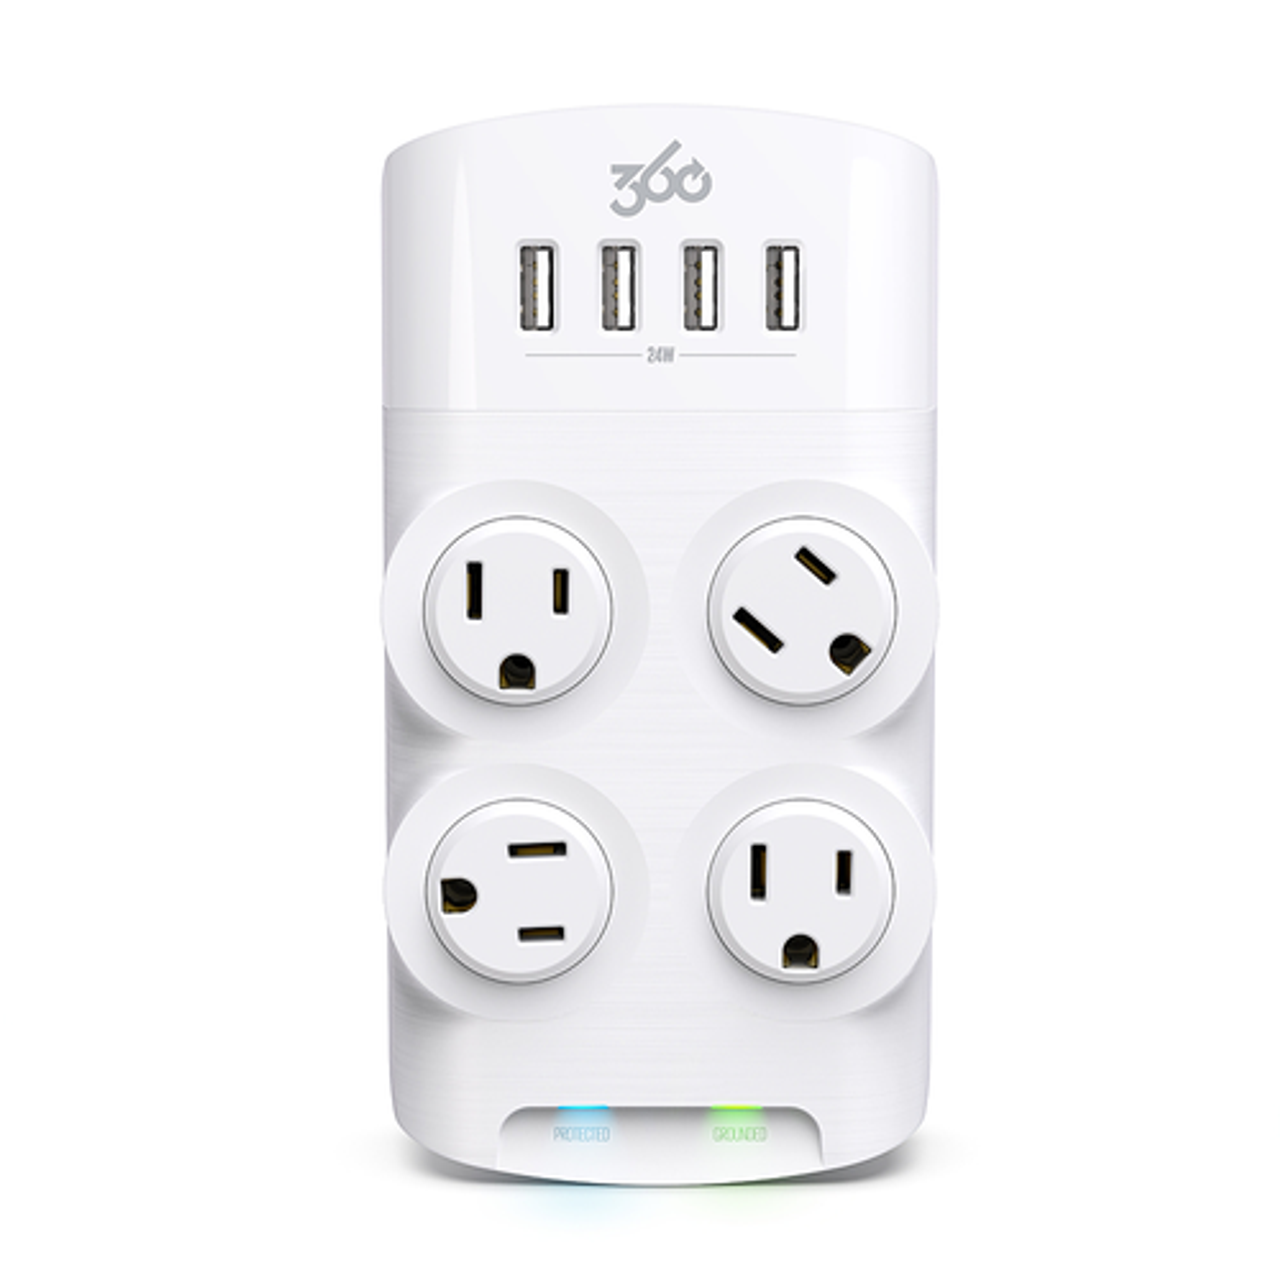 360 Electrical - Revolve24, 4 Rotating Outlets/ 4 USB-A 1080 Joules Surge Protector - White